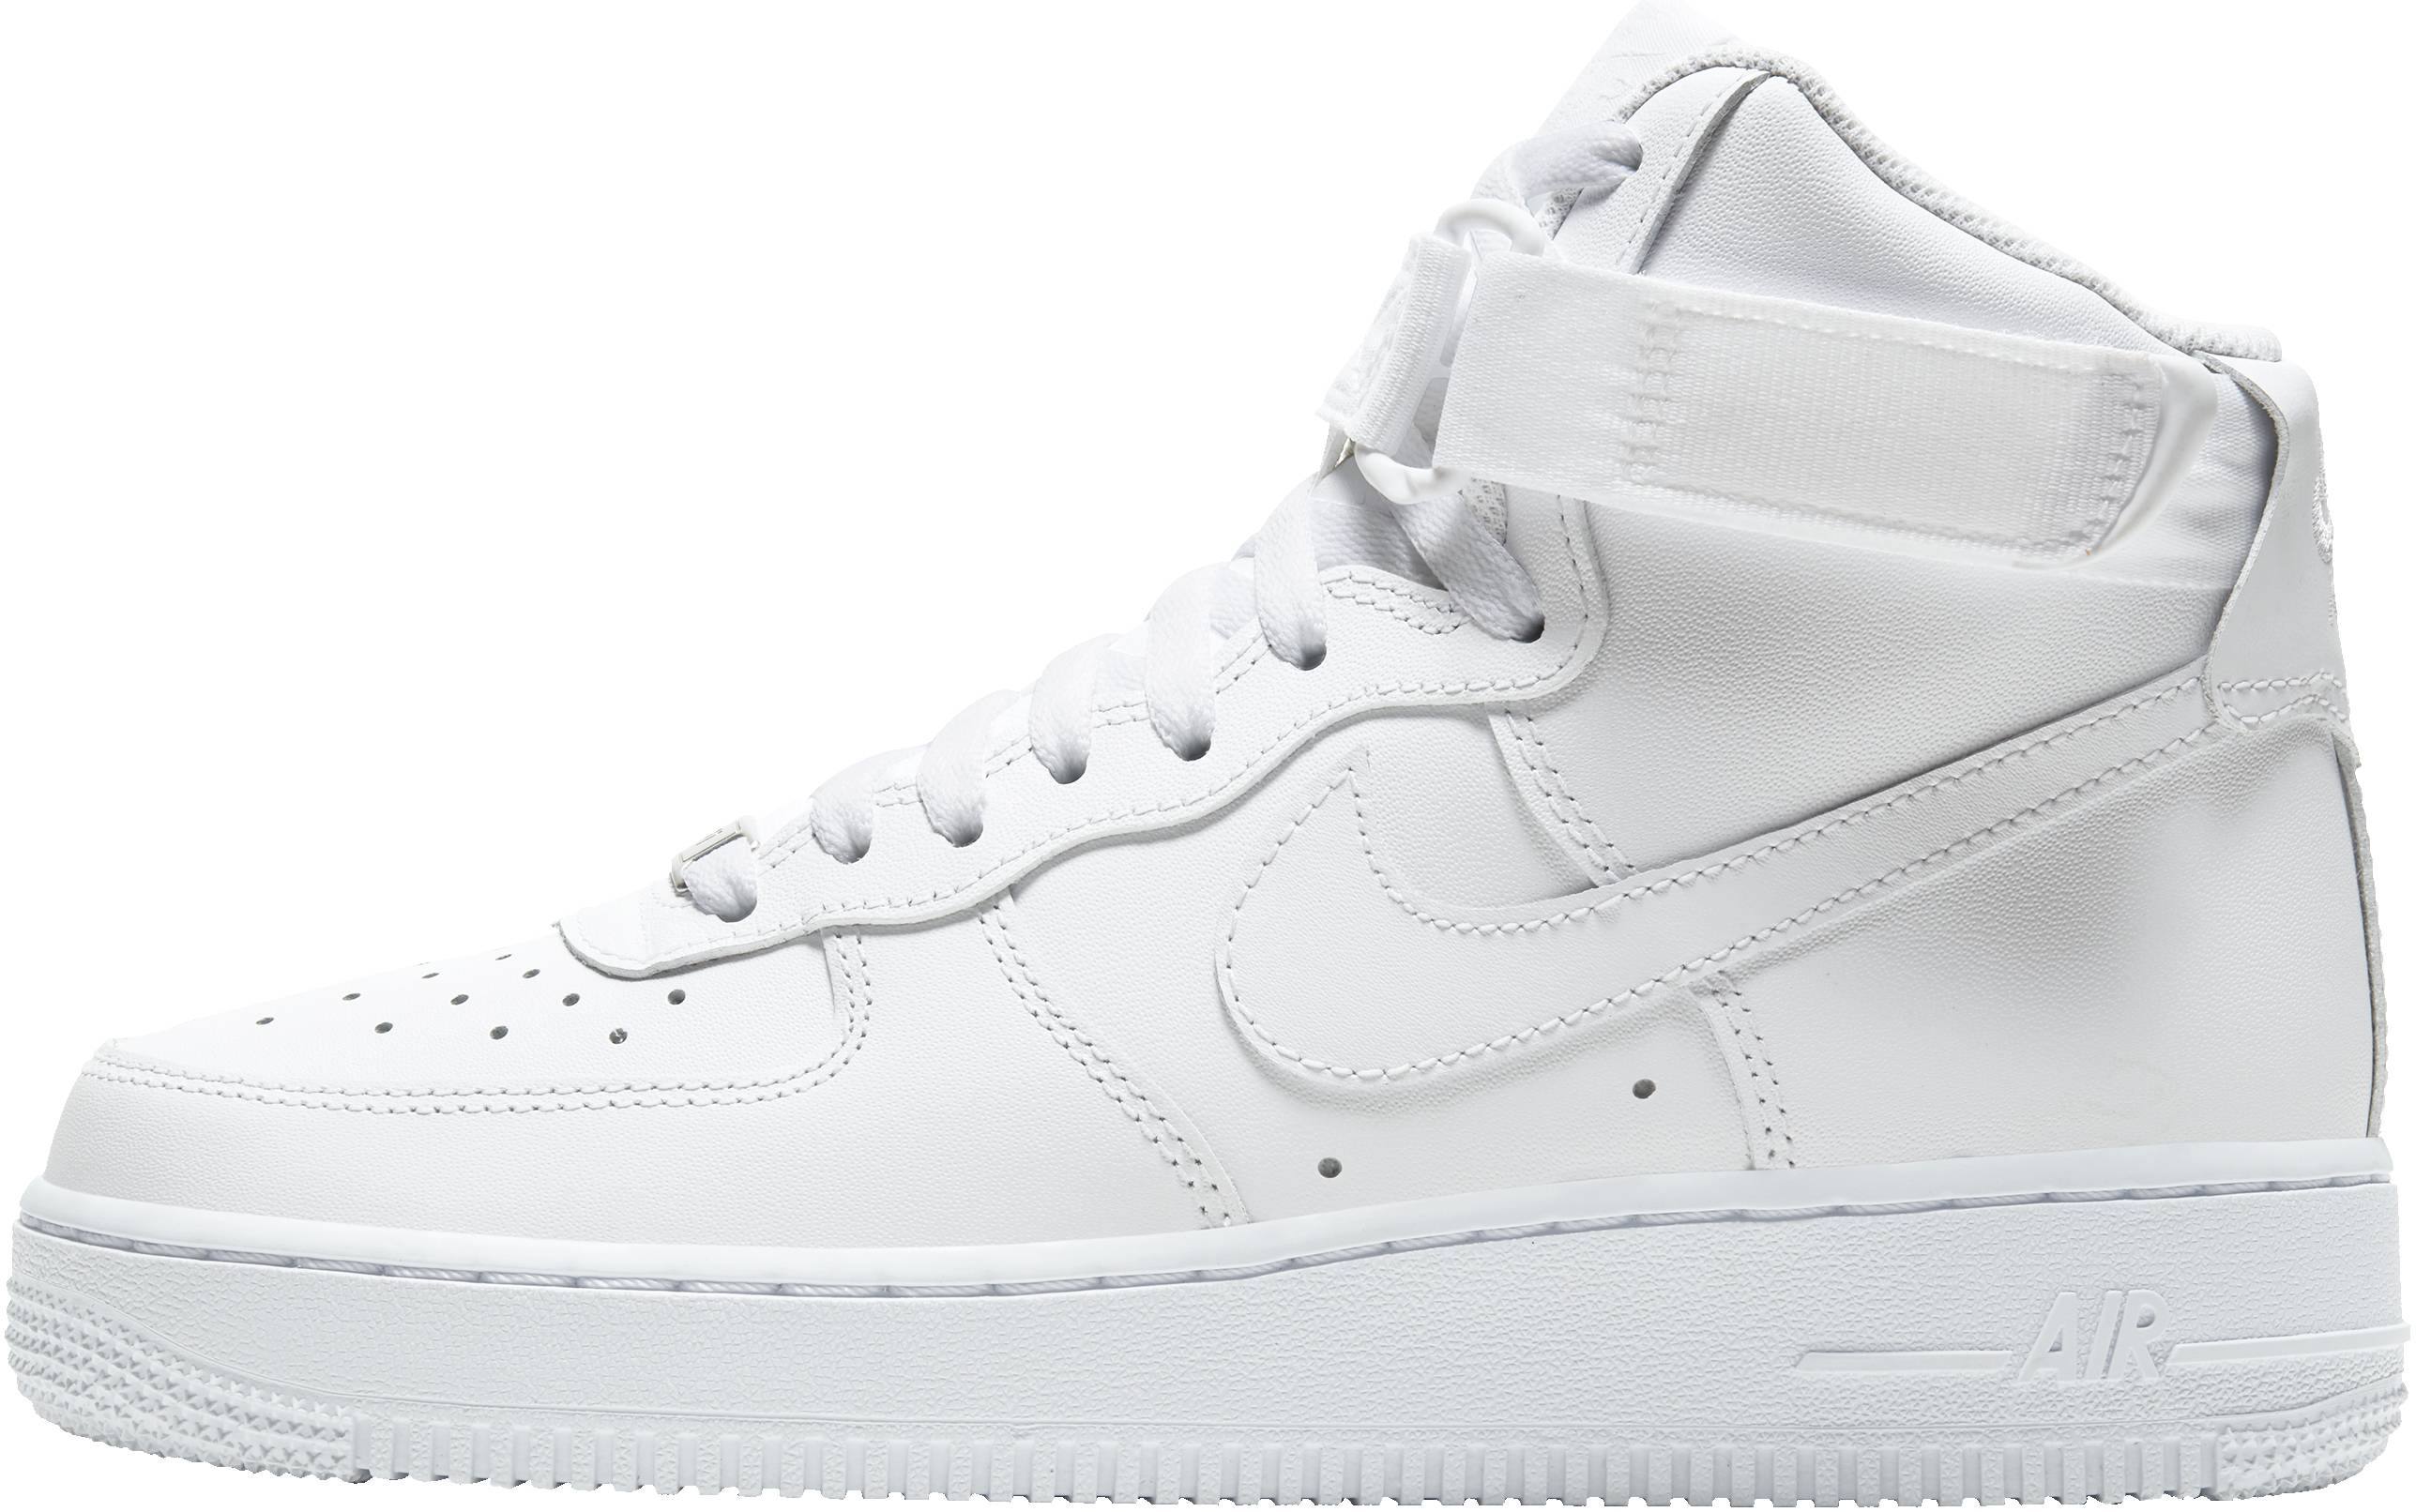 Save 47% on Nike High Top Sneakers (73 